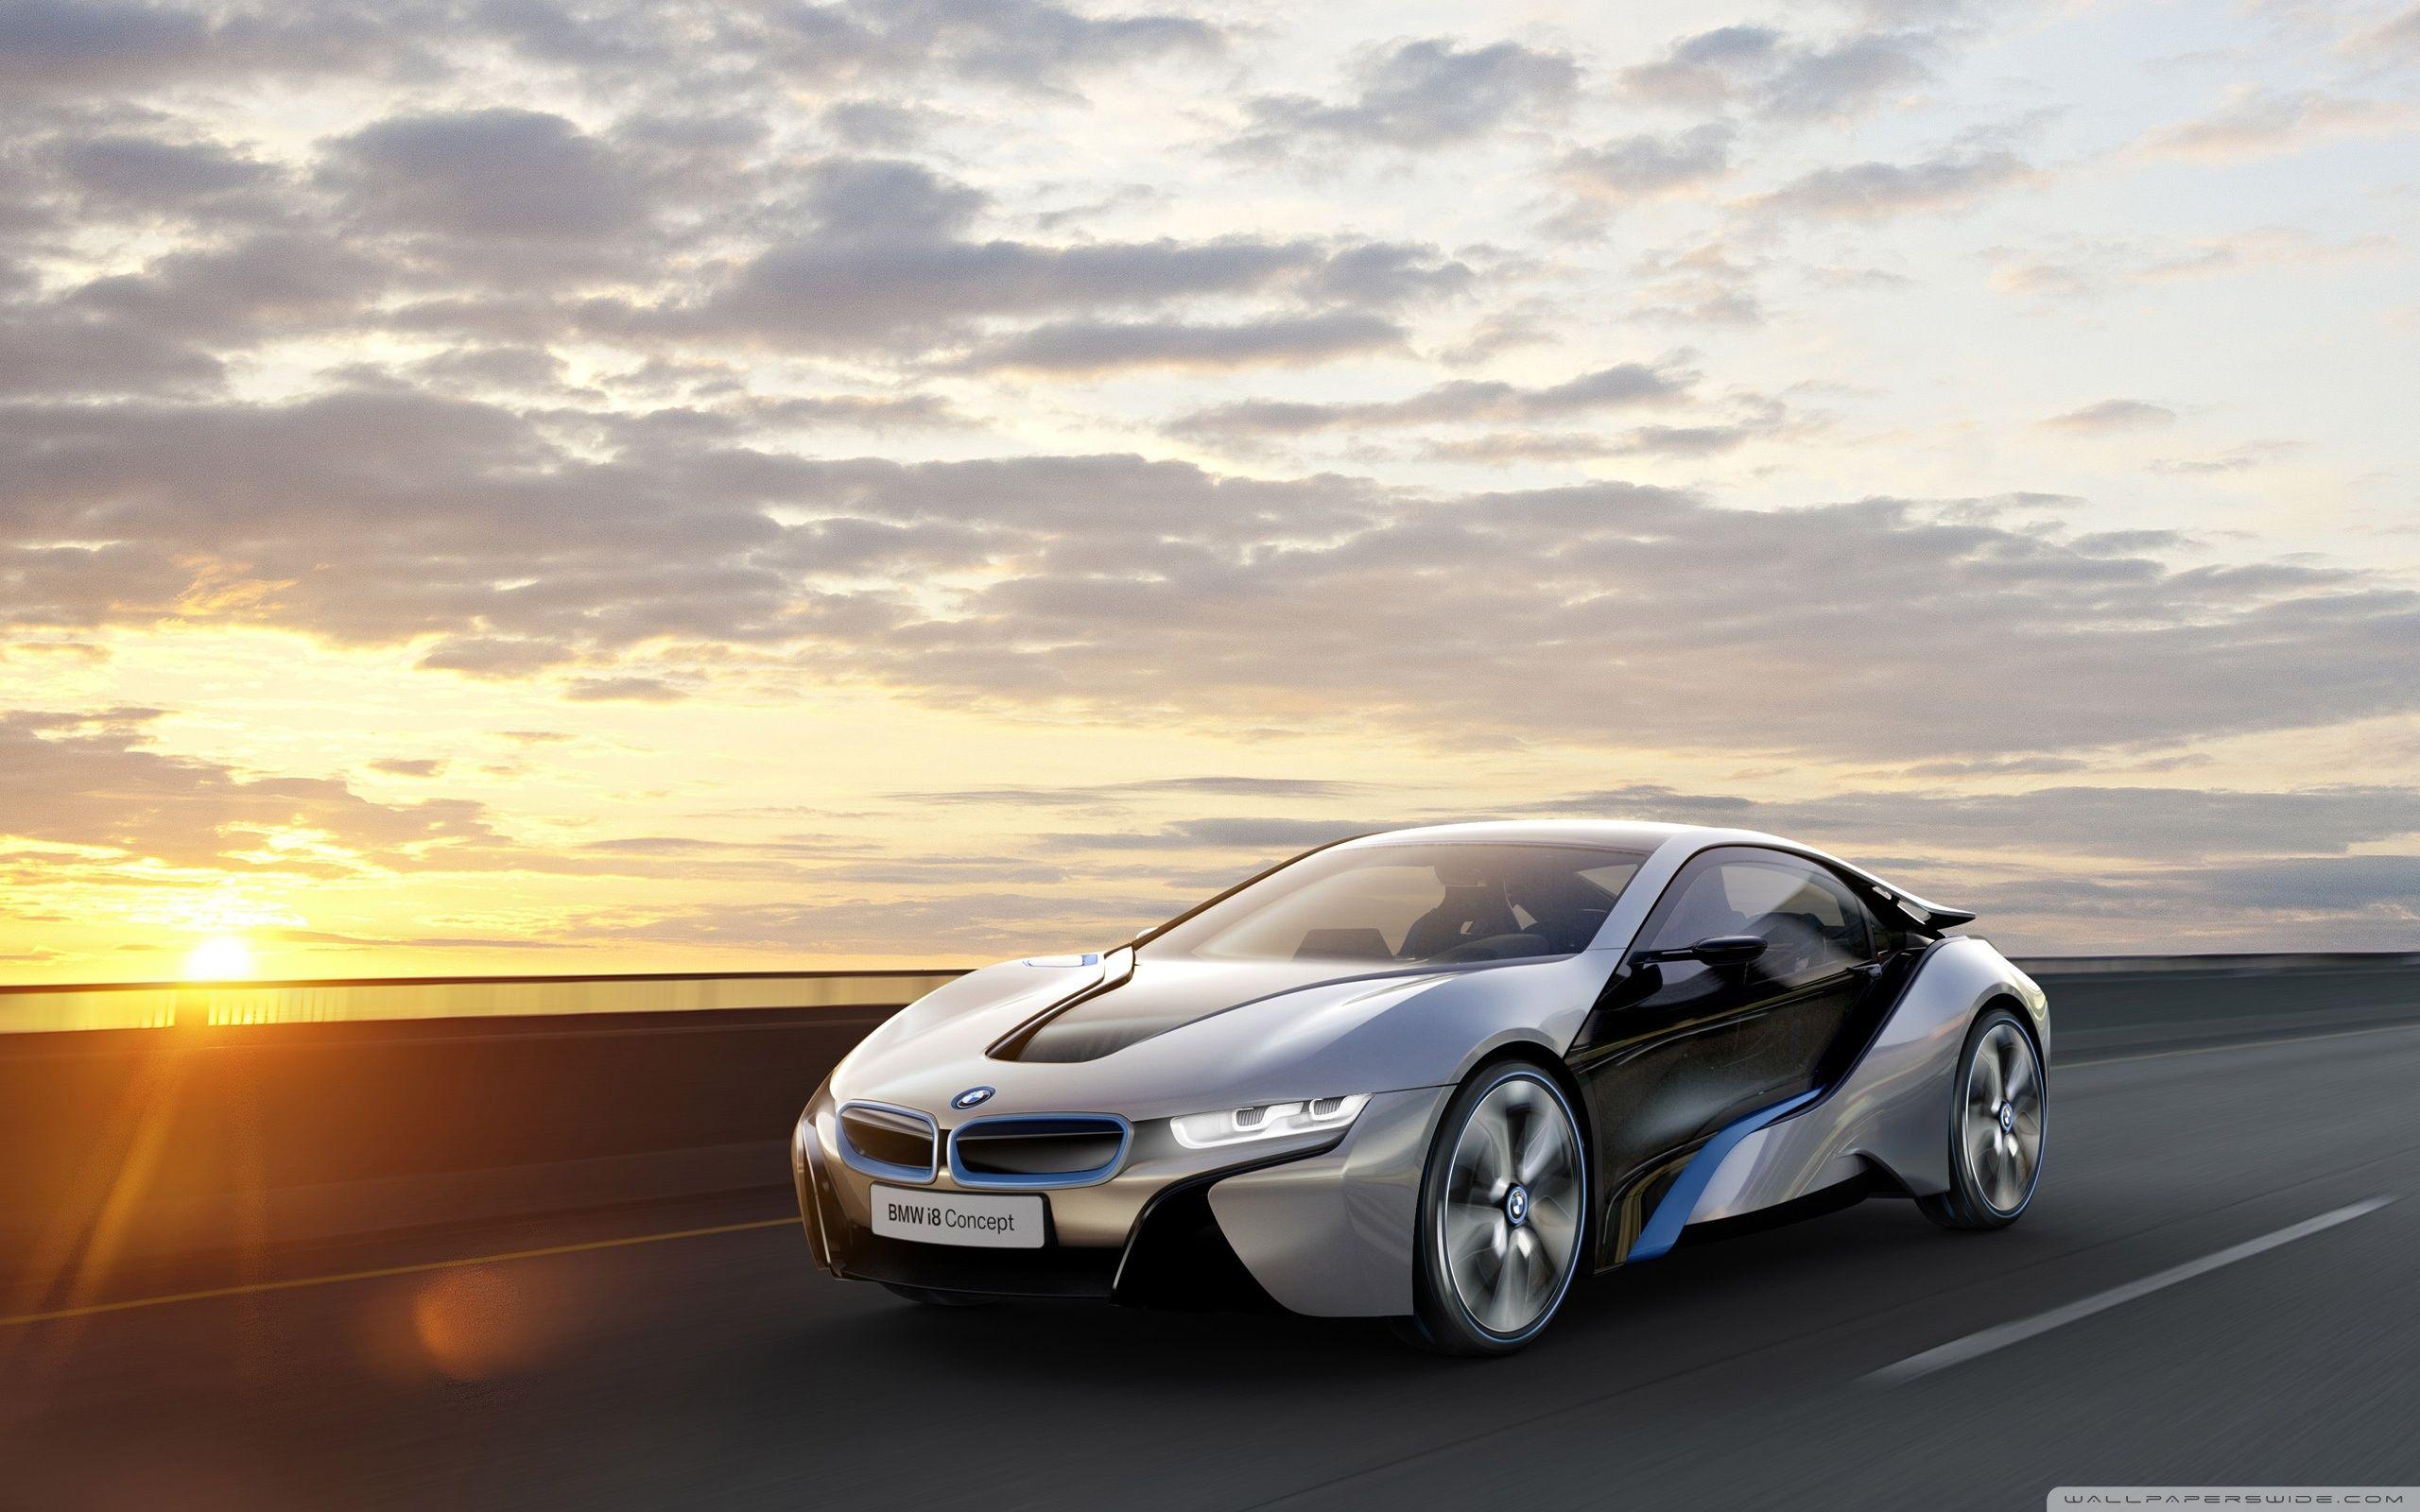 Bmw I8 Hd Wallpapers Top Free Bmw I8 Hd Backgrounds Wallpaperaccess